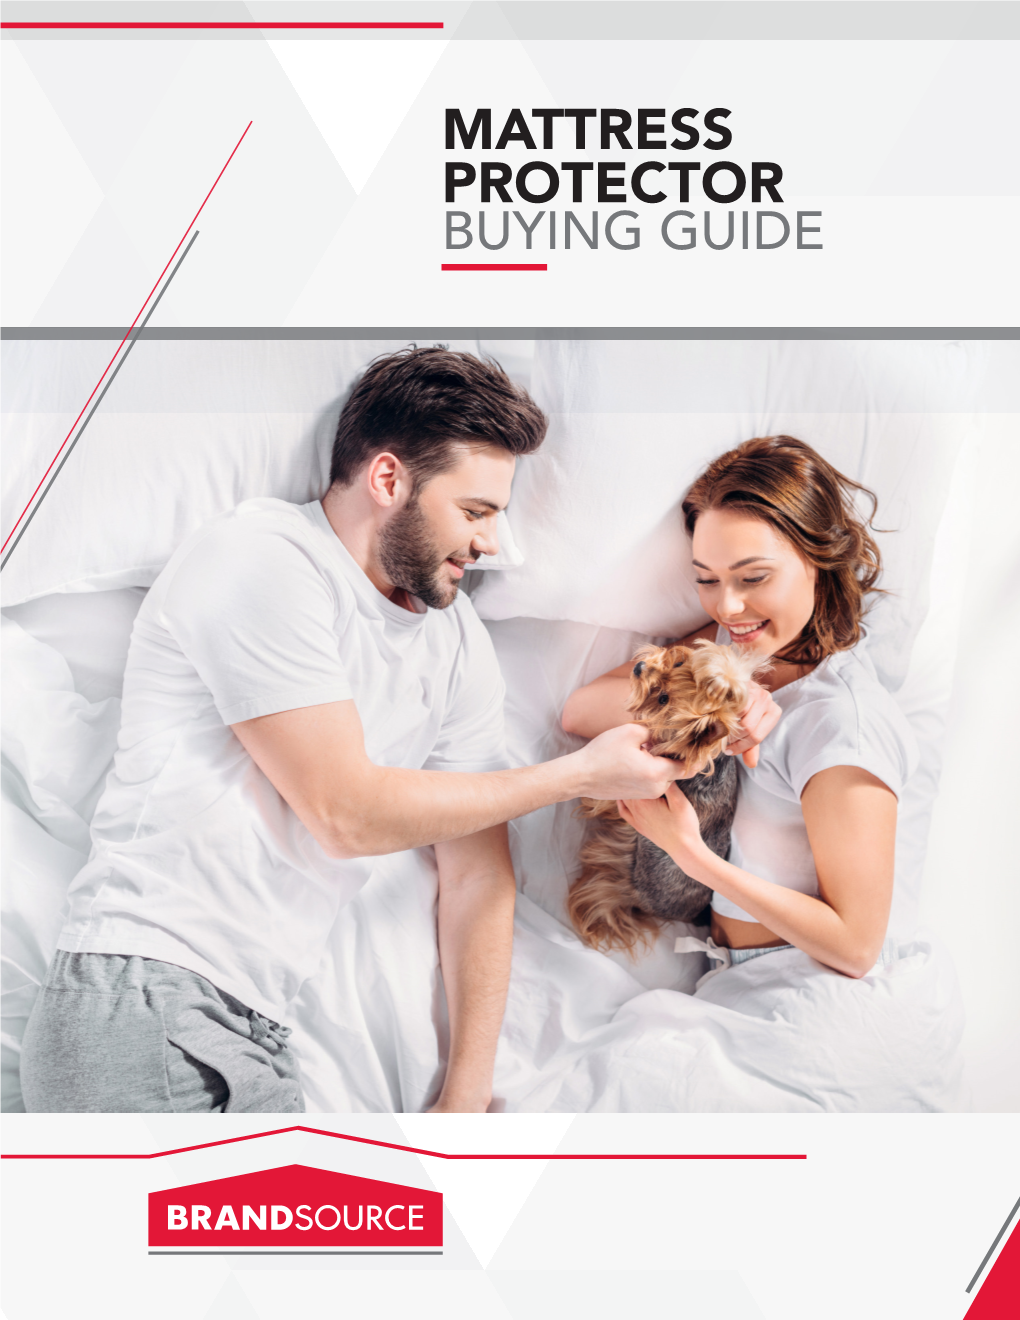 Mattress Protector Buying Guide Contents